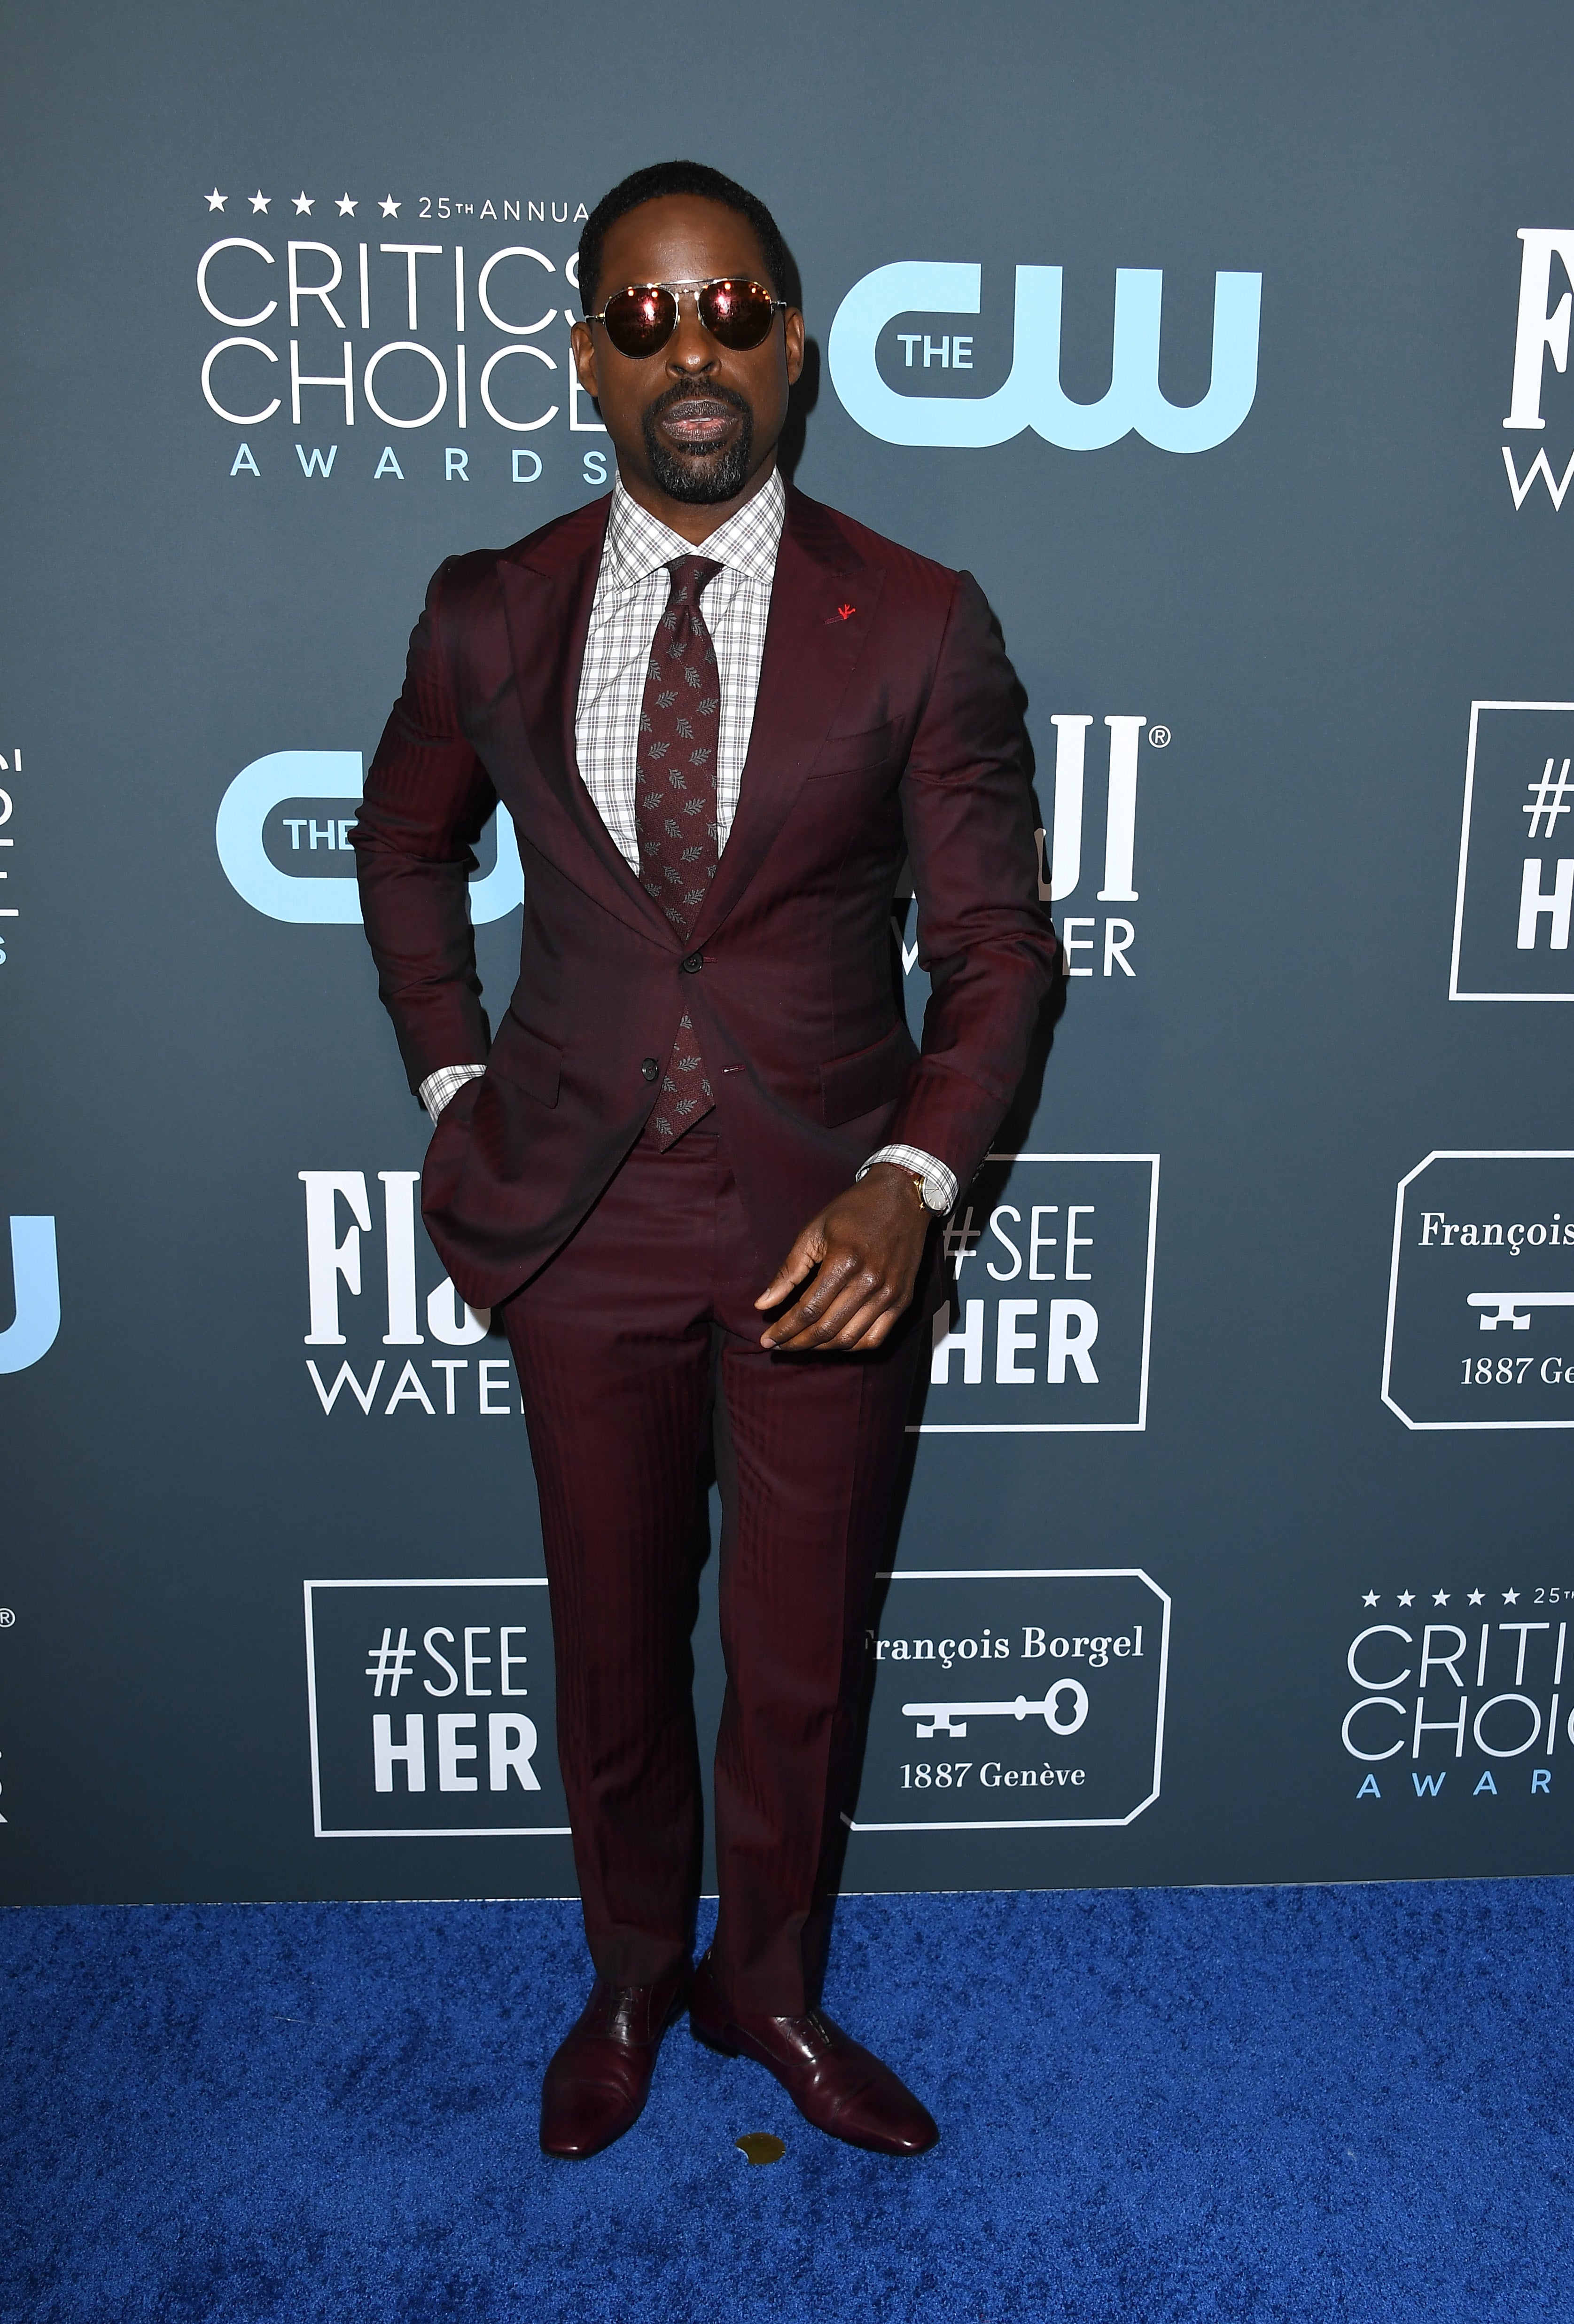 The Best Fashion Moments From The 25th Annual Critics' Choice Awards